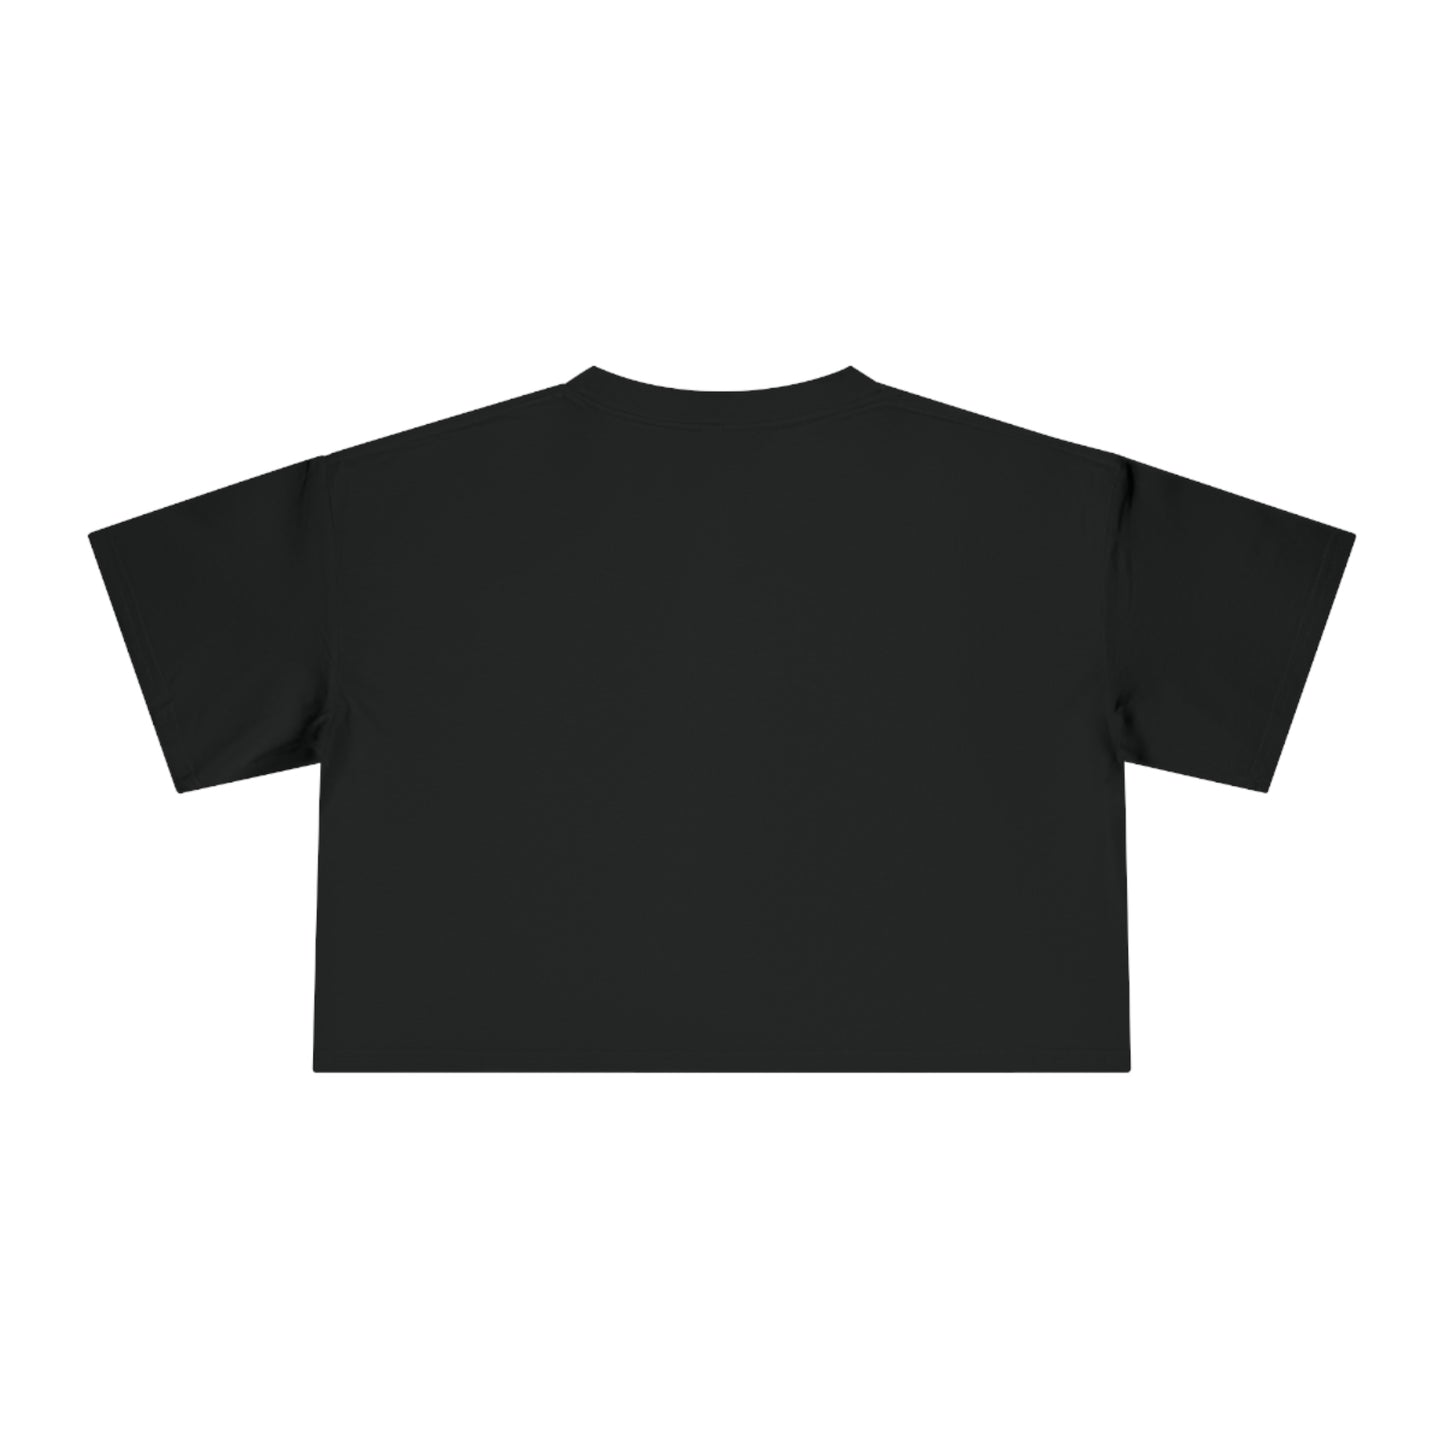 Production Girly Black Cropped Graphic T-shirt